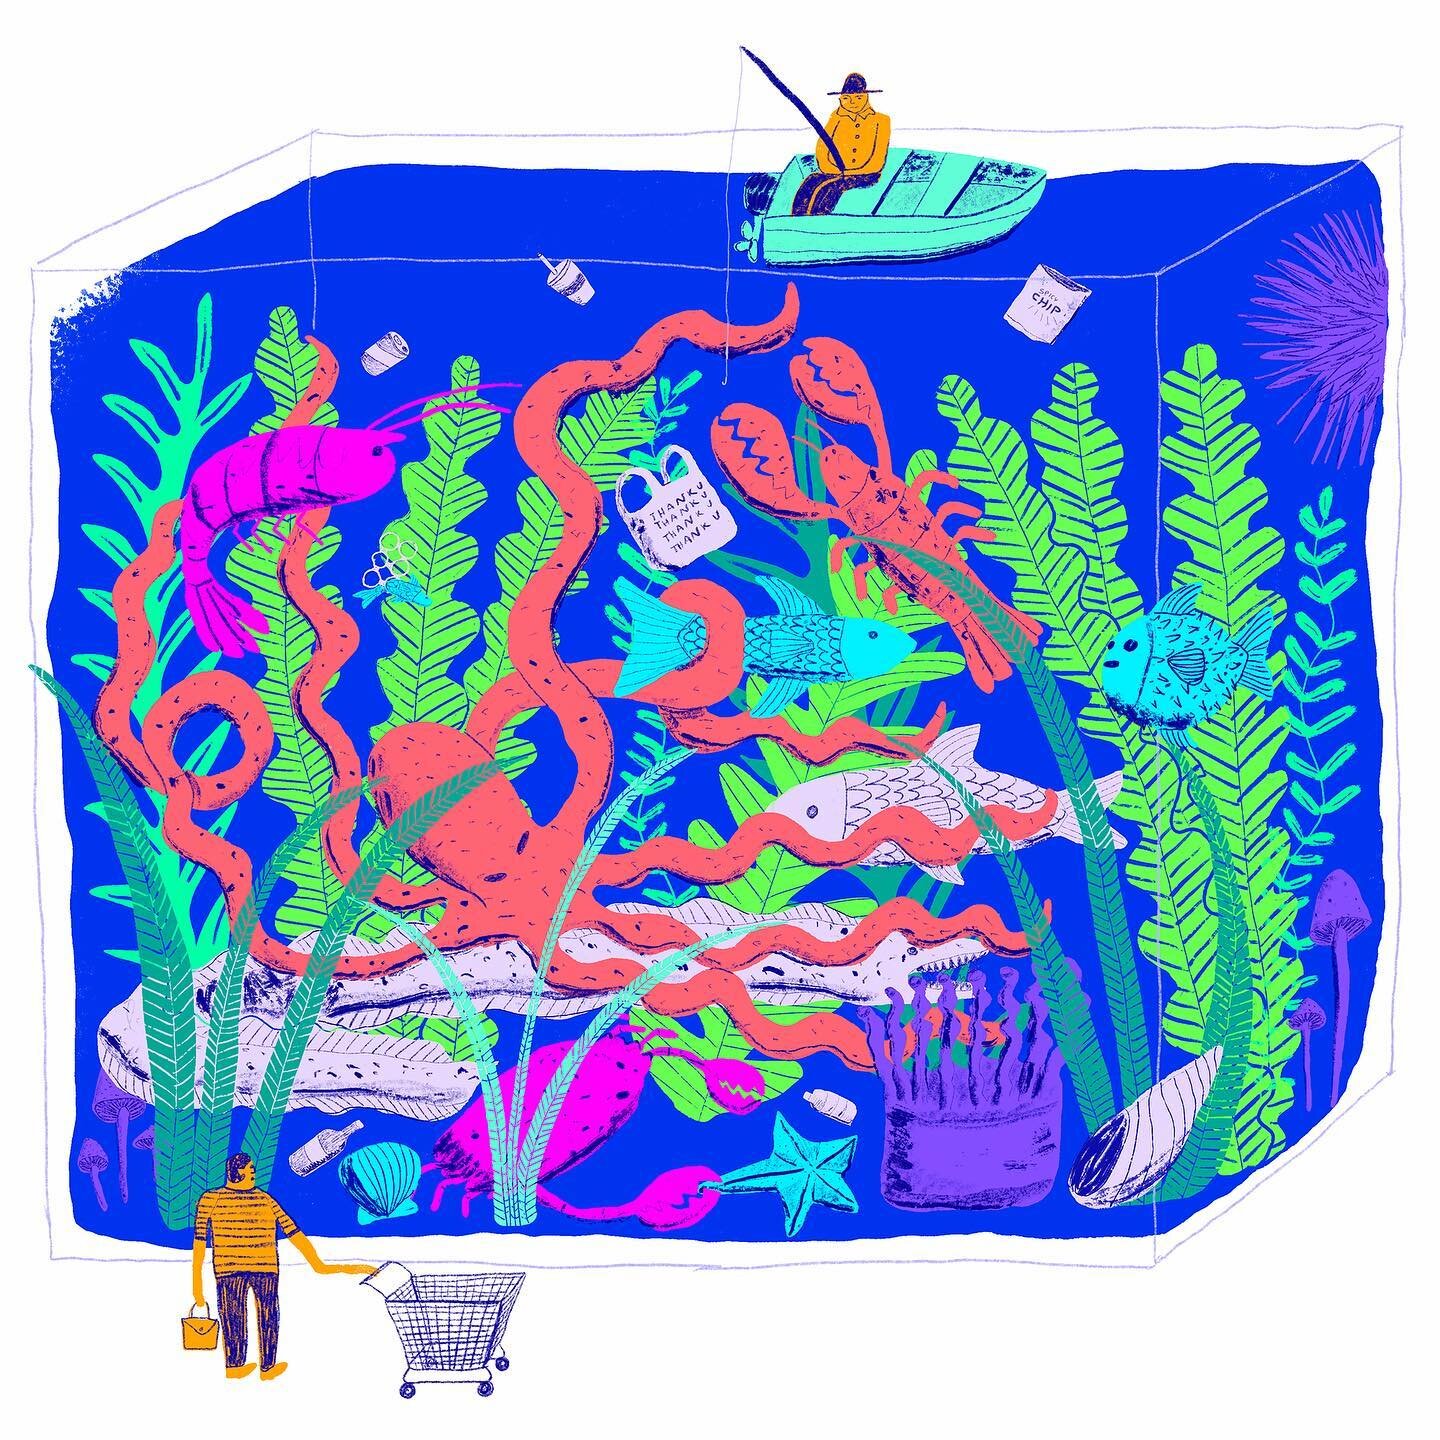 this was a fun illo i did for a class assignment last year. layered, spooky, day glo, immersive, fantastical aquarium vibes. thanks @jasonkernevich for the direction!
.
#illustration #editorialillustration #nytimesbookreview